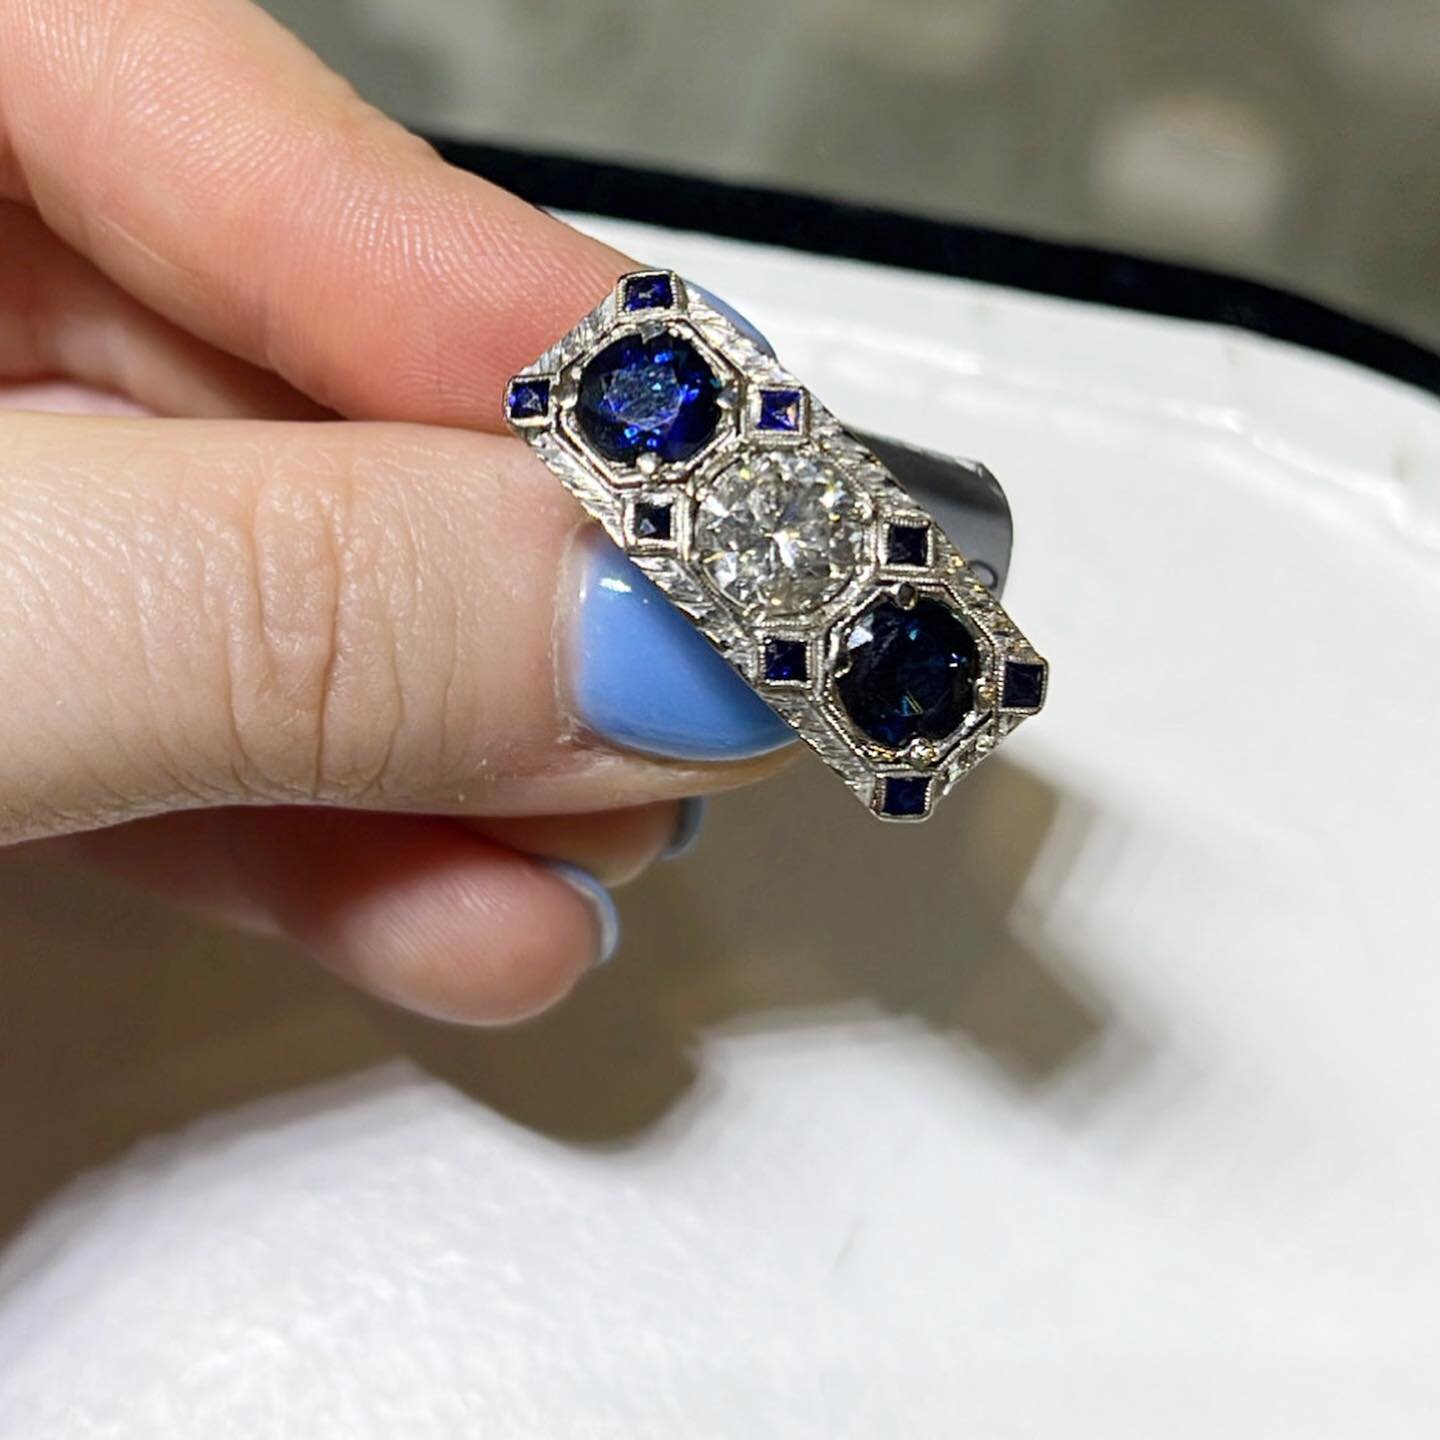 There&rsquo;s no better combination than #sapphire and #diamonds 💫 look at her sparkle! 

#antiquejewelry #artdeco #artdecojewelry #antiques #smallbusinessowner #oneofakindjewelry #supportsmallbusiness